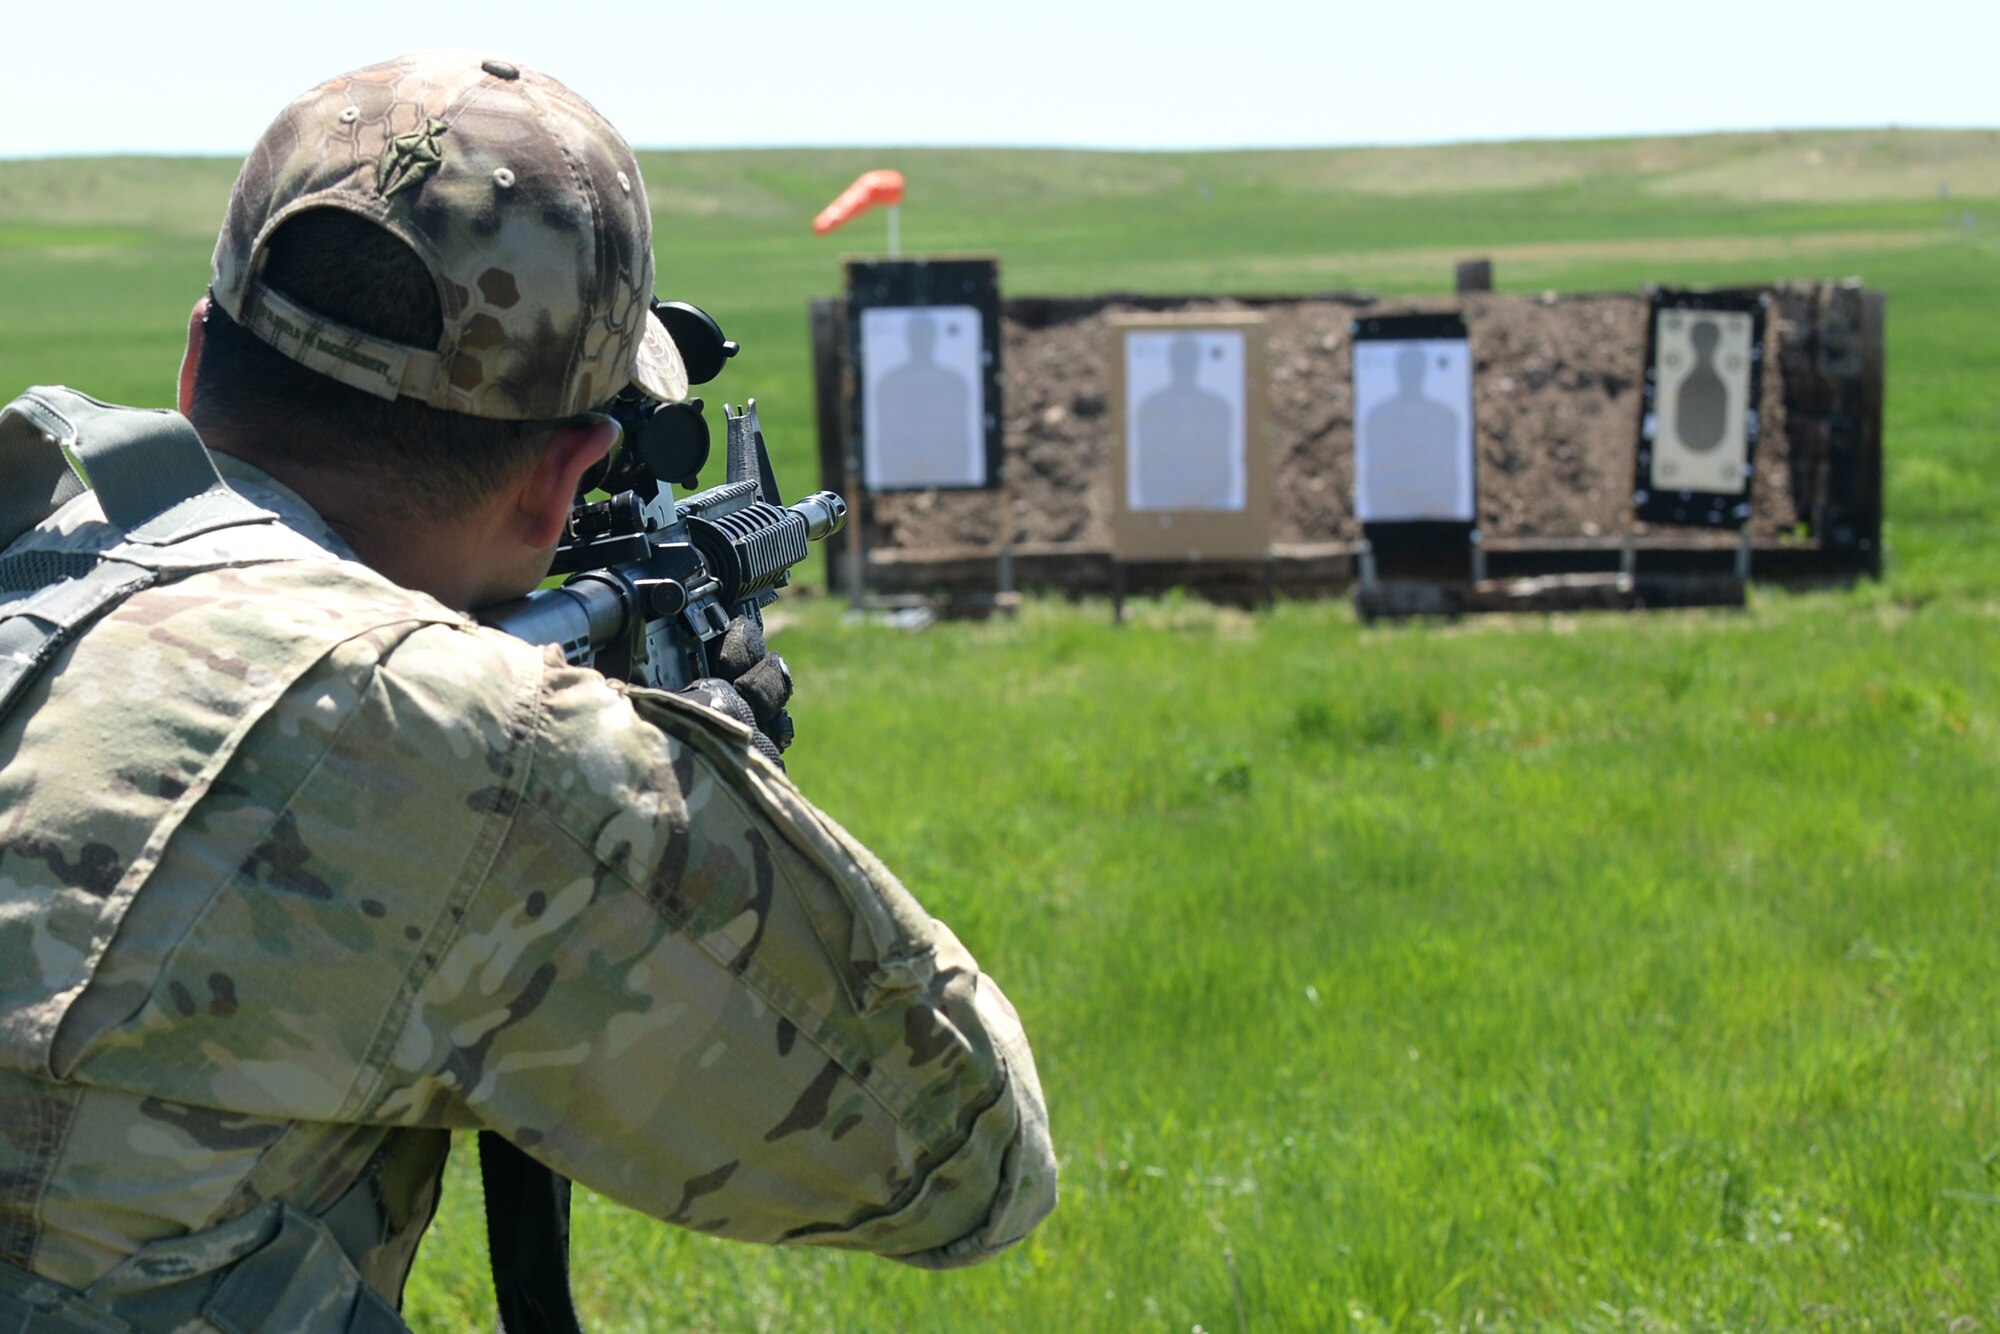 Staff Sgt. Edgar Cerrillo, 28th Security Forces Squadron unit orientation training instructor fires a M-4 Carbine rifle, during a qualification course at an outdoor shooting range in Rapid City, S.D., May 29, 2014. The training focused on extreme marksmanship, mental and physical fitness as well as tactical engagement and agility. (U.S. Air Force photo by Airman 1st Class Rebecca Imwalle/ Released)